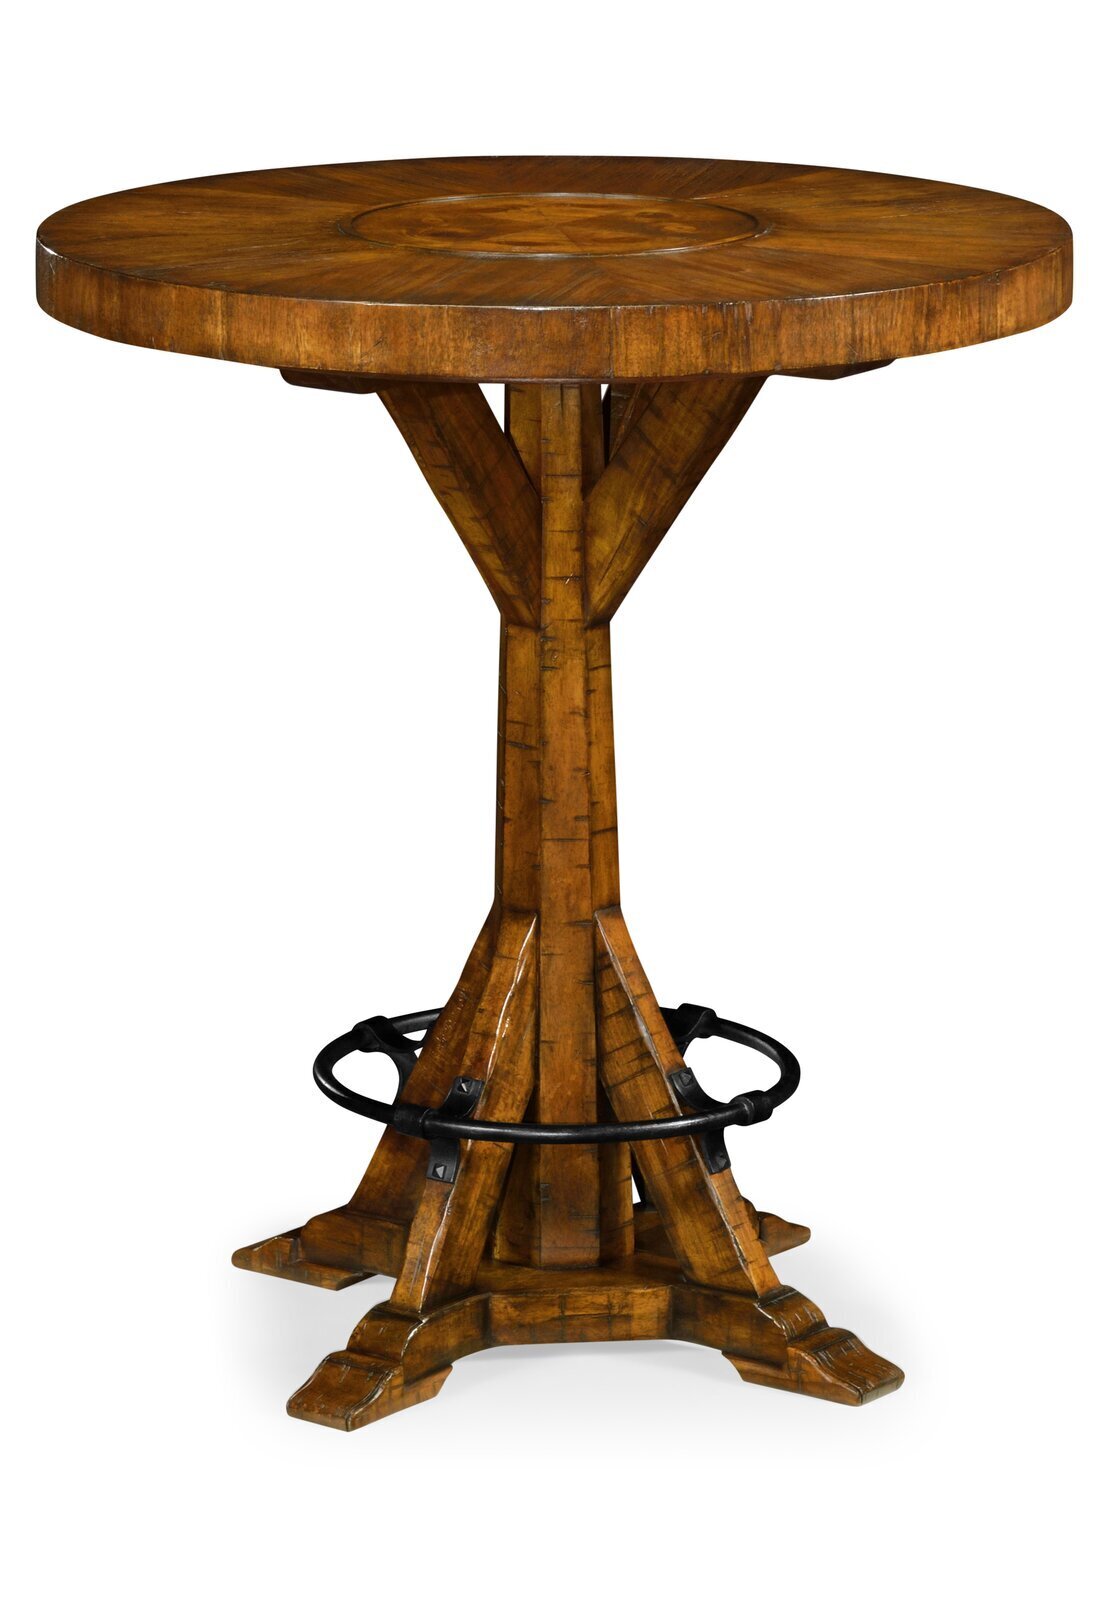 Tall Farmhouse Style Round Dining Table With Drop Leaf